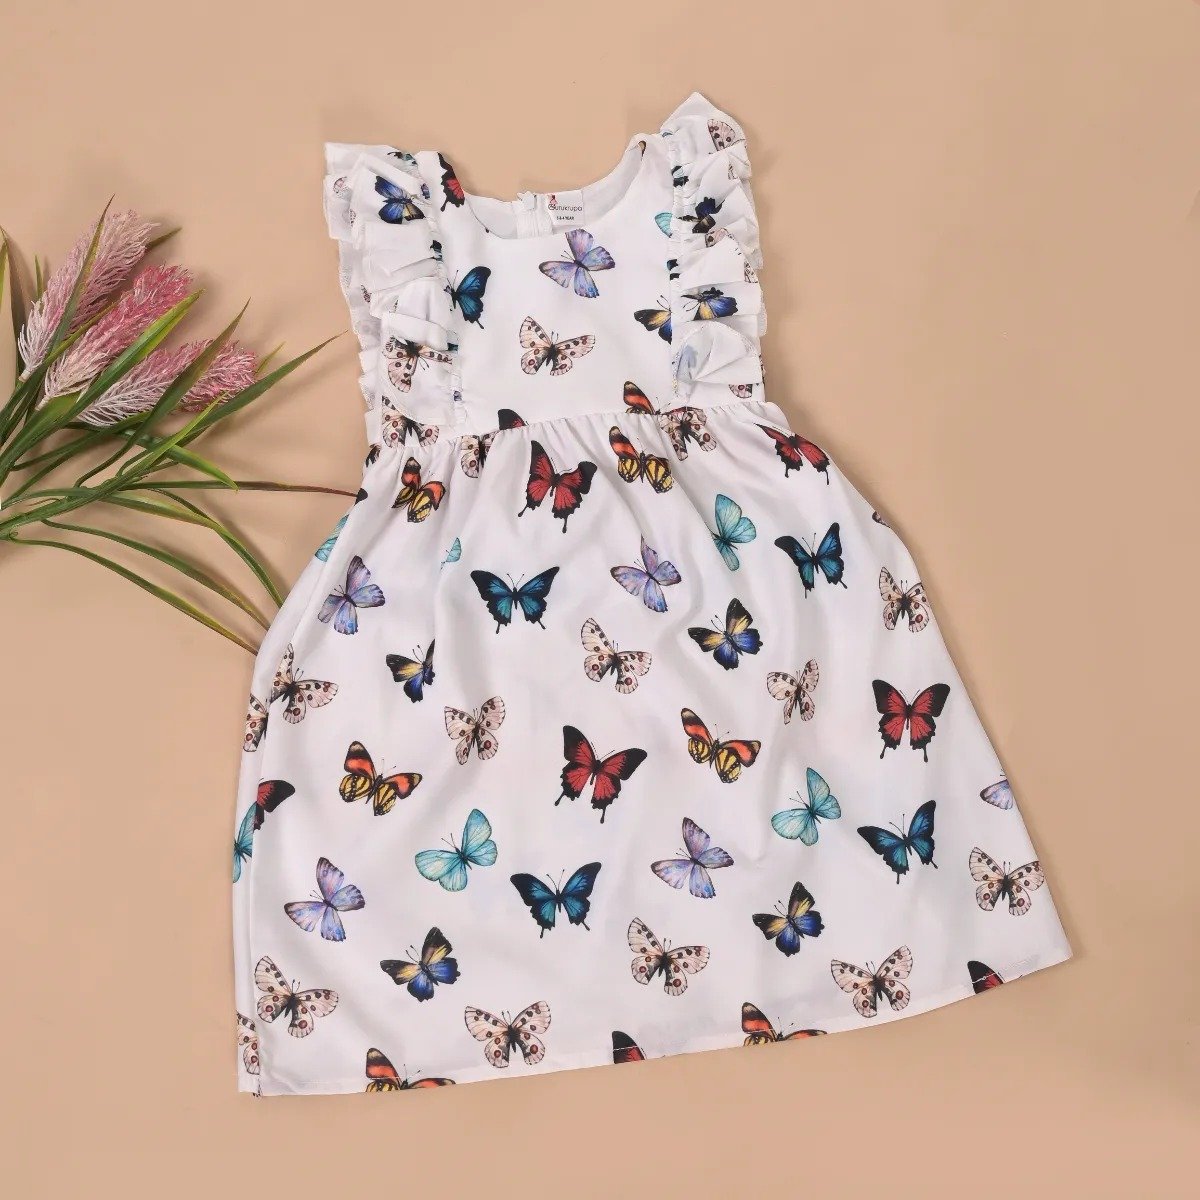 Snoozy Sloth White Butterfly Print Frock for Baby Girl